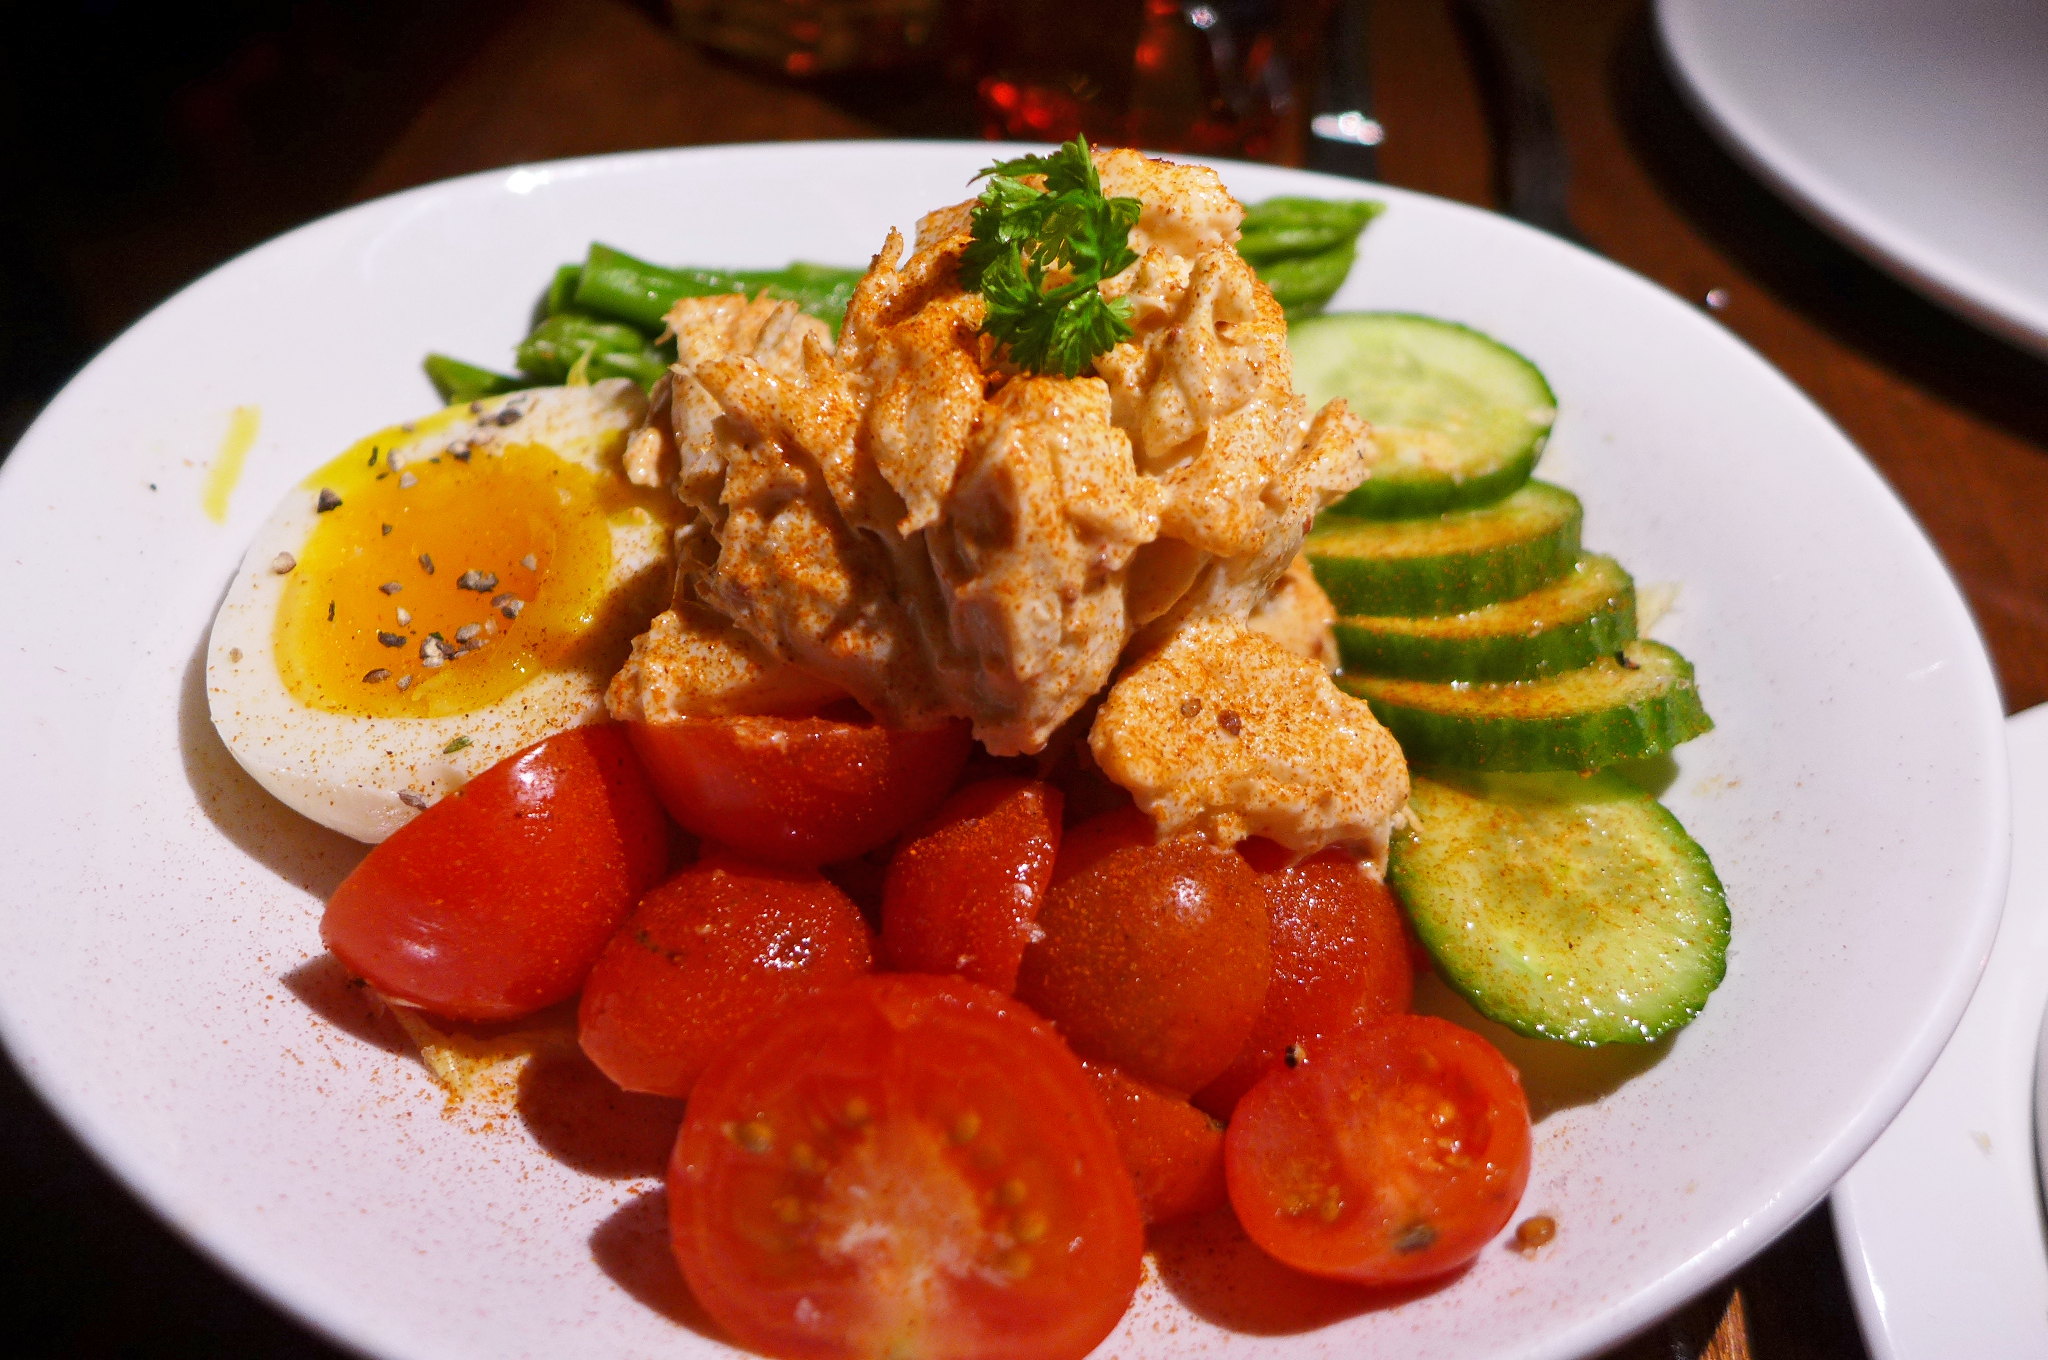 Eggs, cucumber, tomato, and crab in a salad. 